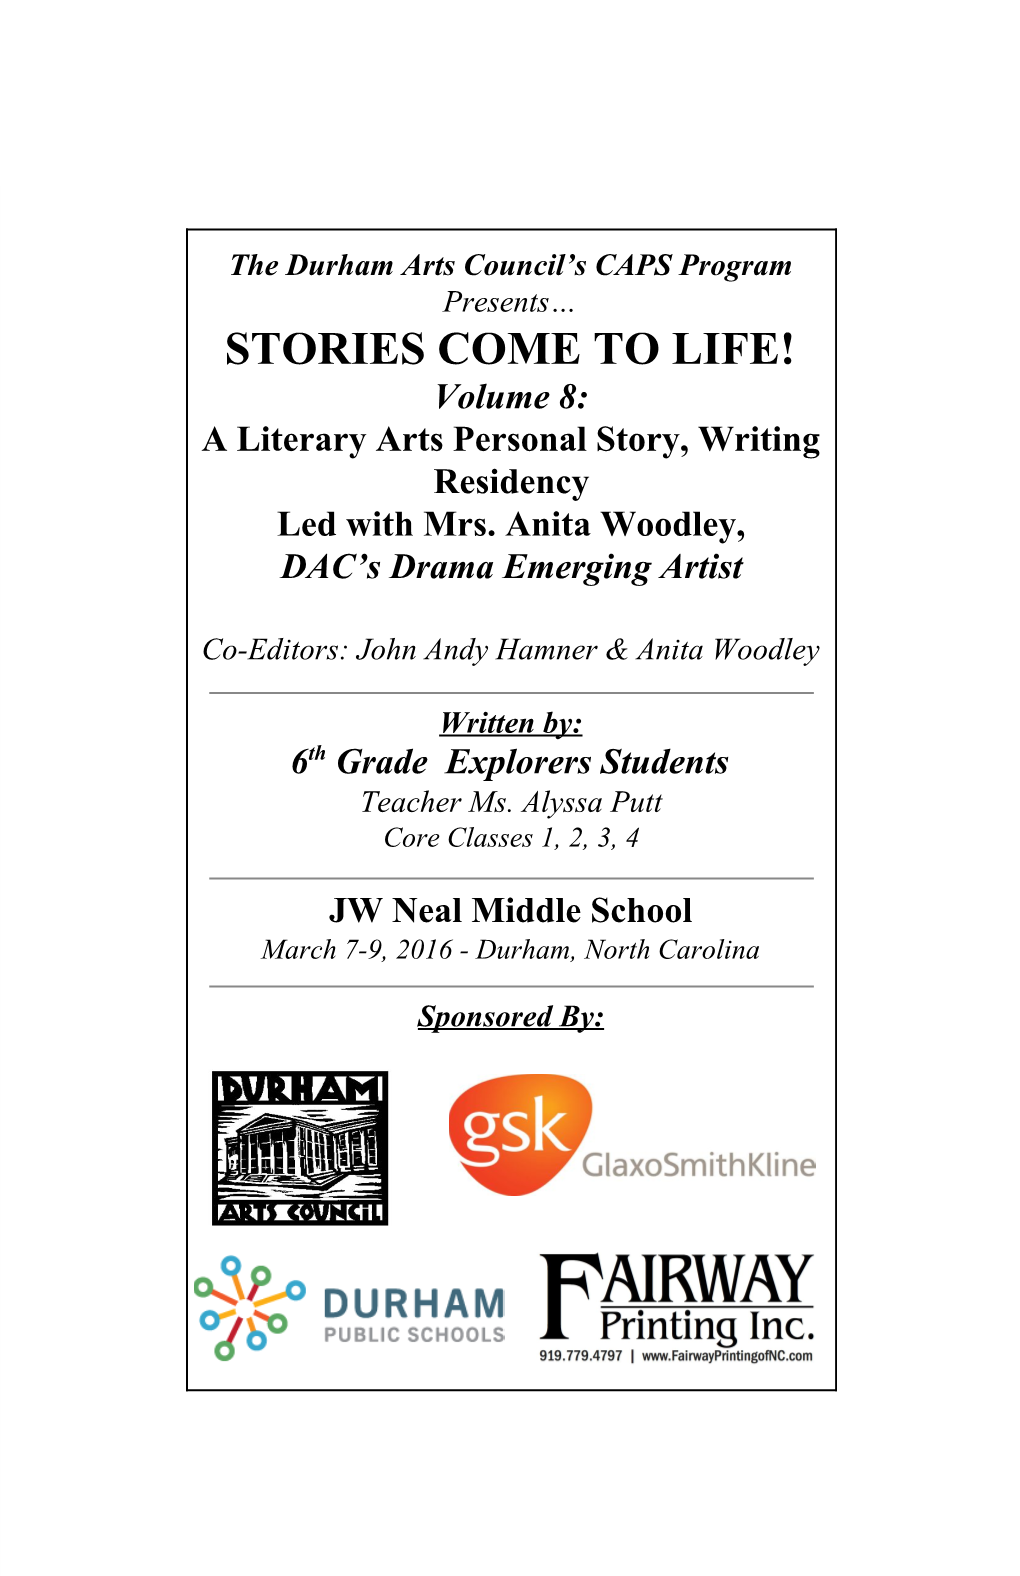 STORIES COME to LIFE! Volume 8: a Literary Arts Personal Story, Writing Residency Led with Mrs